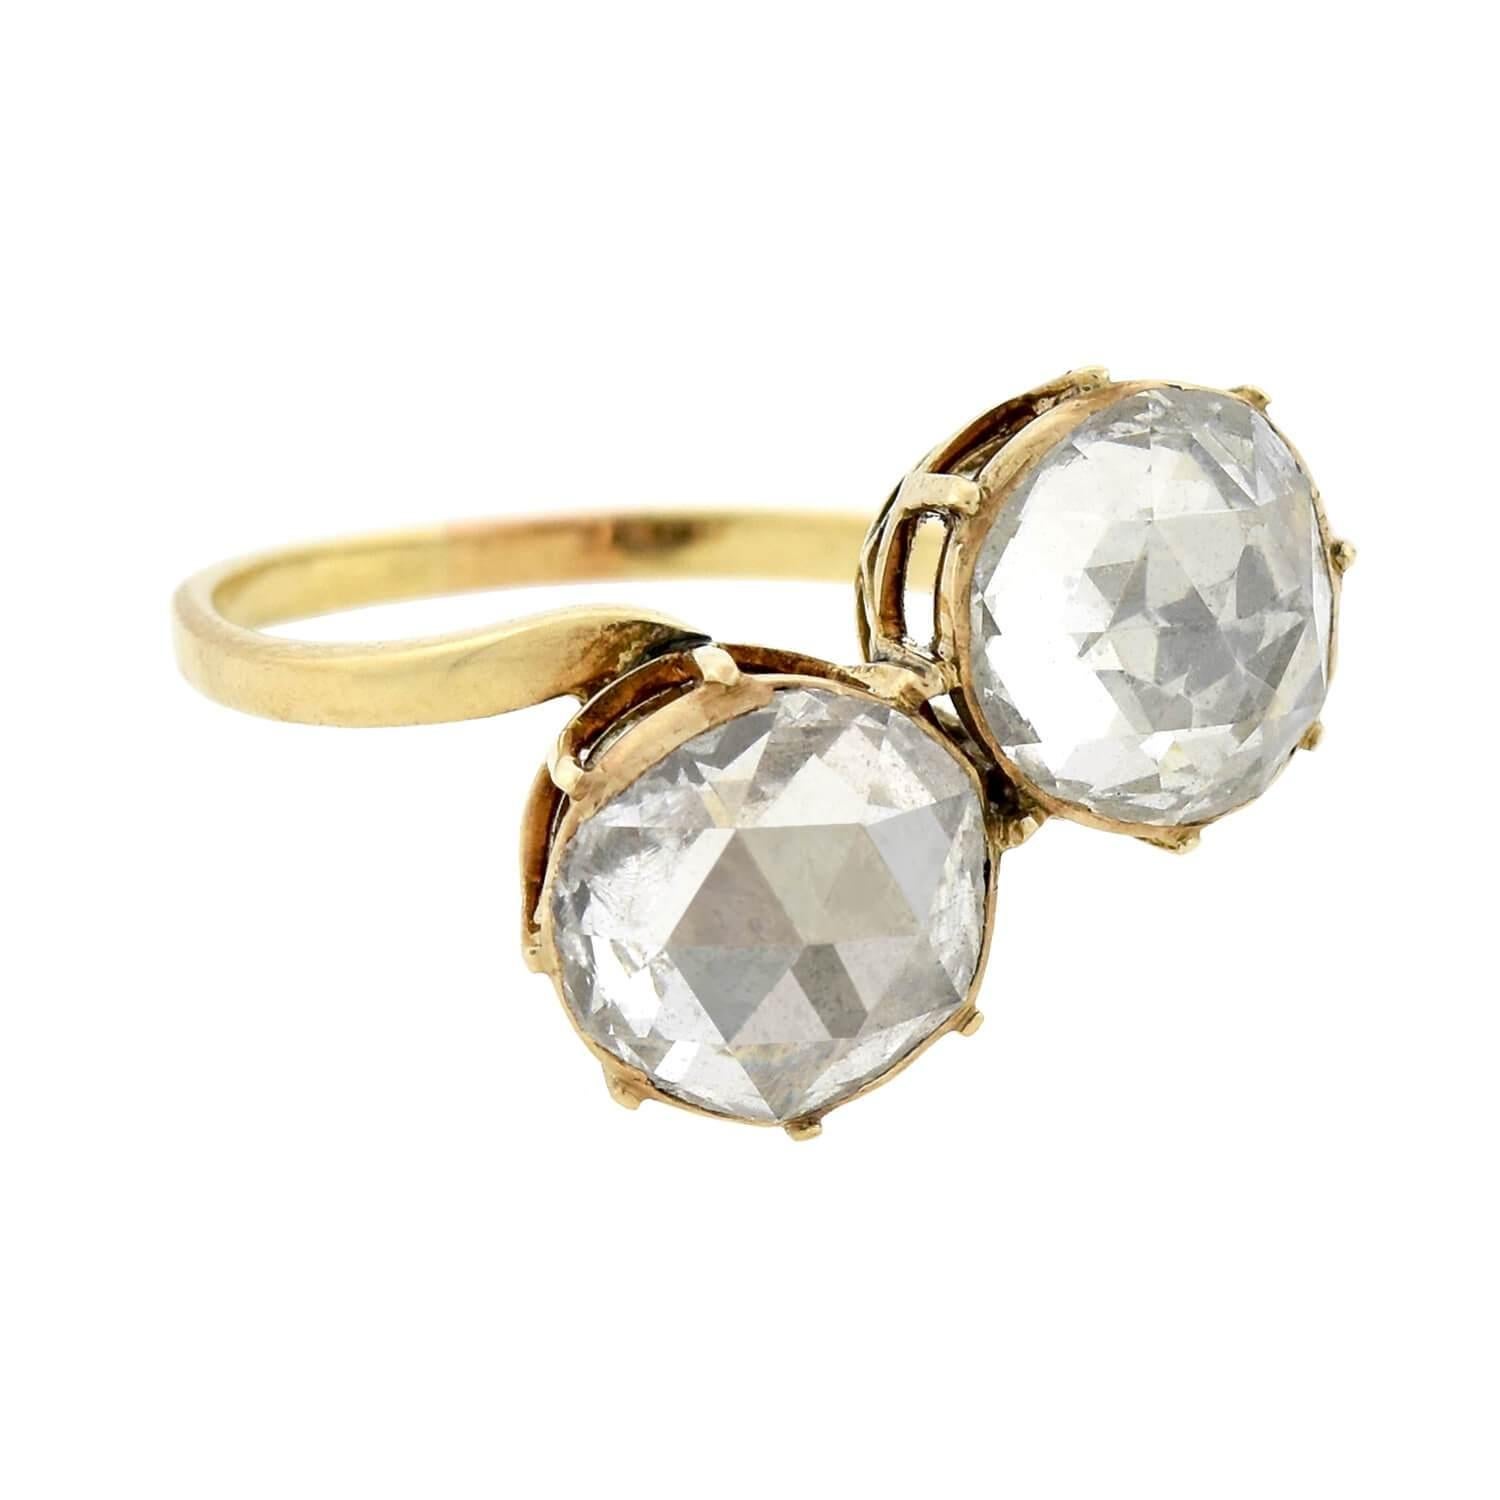 An absolutely stunning Moi et Toi ring from the late Victorian (ca1900s) era! Crafted in 18kt yellow gold, this gorgeous piece features two generously sized old Rose Cut diamonds which sparkle within closed, foil-backed settings. Collectively, the